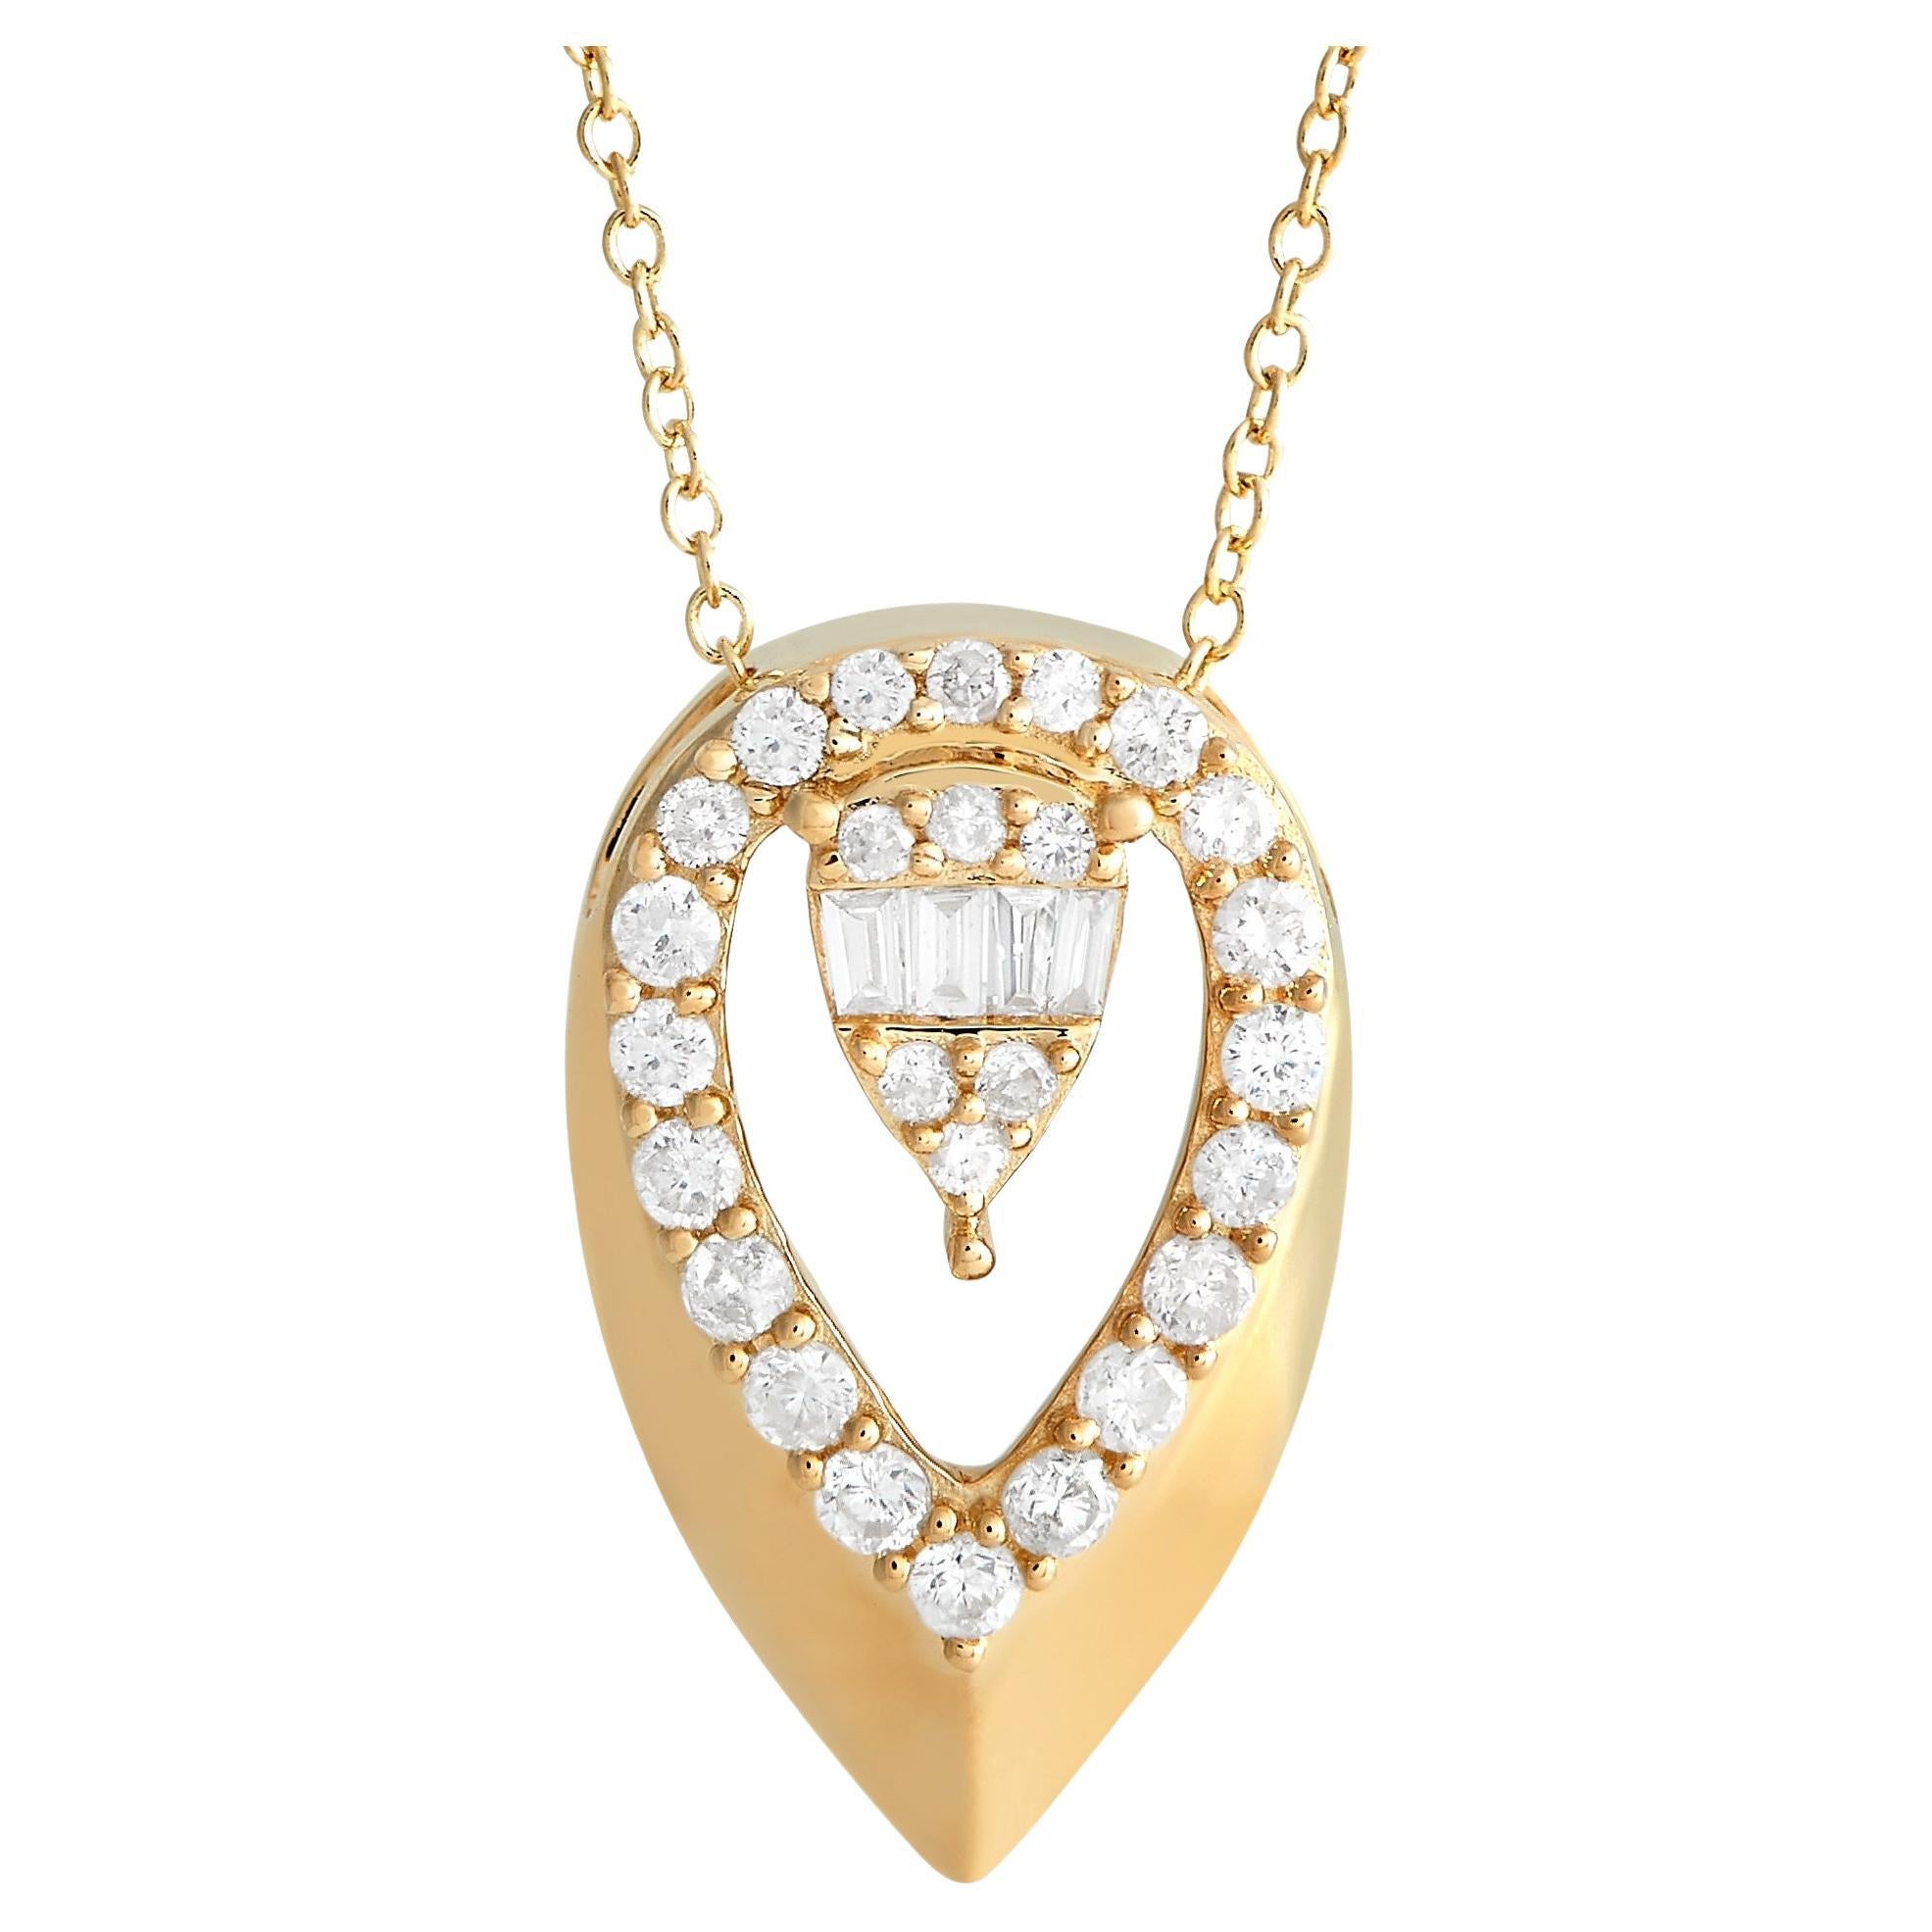 LB Exclusive 14K Yellow Gold 0.30ct Diamond Teardrop Necklace For Sale